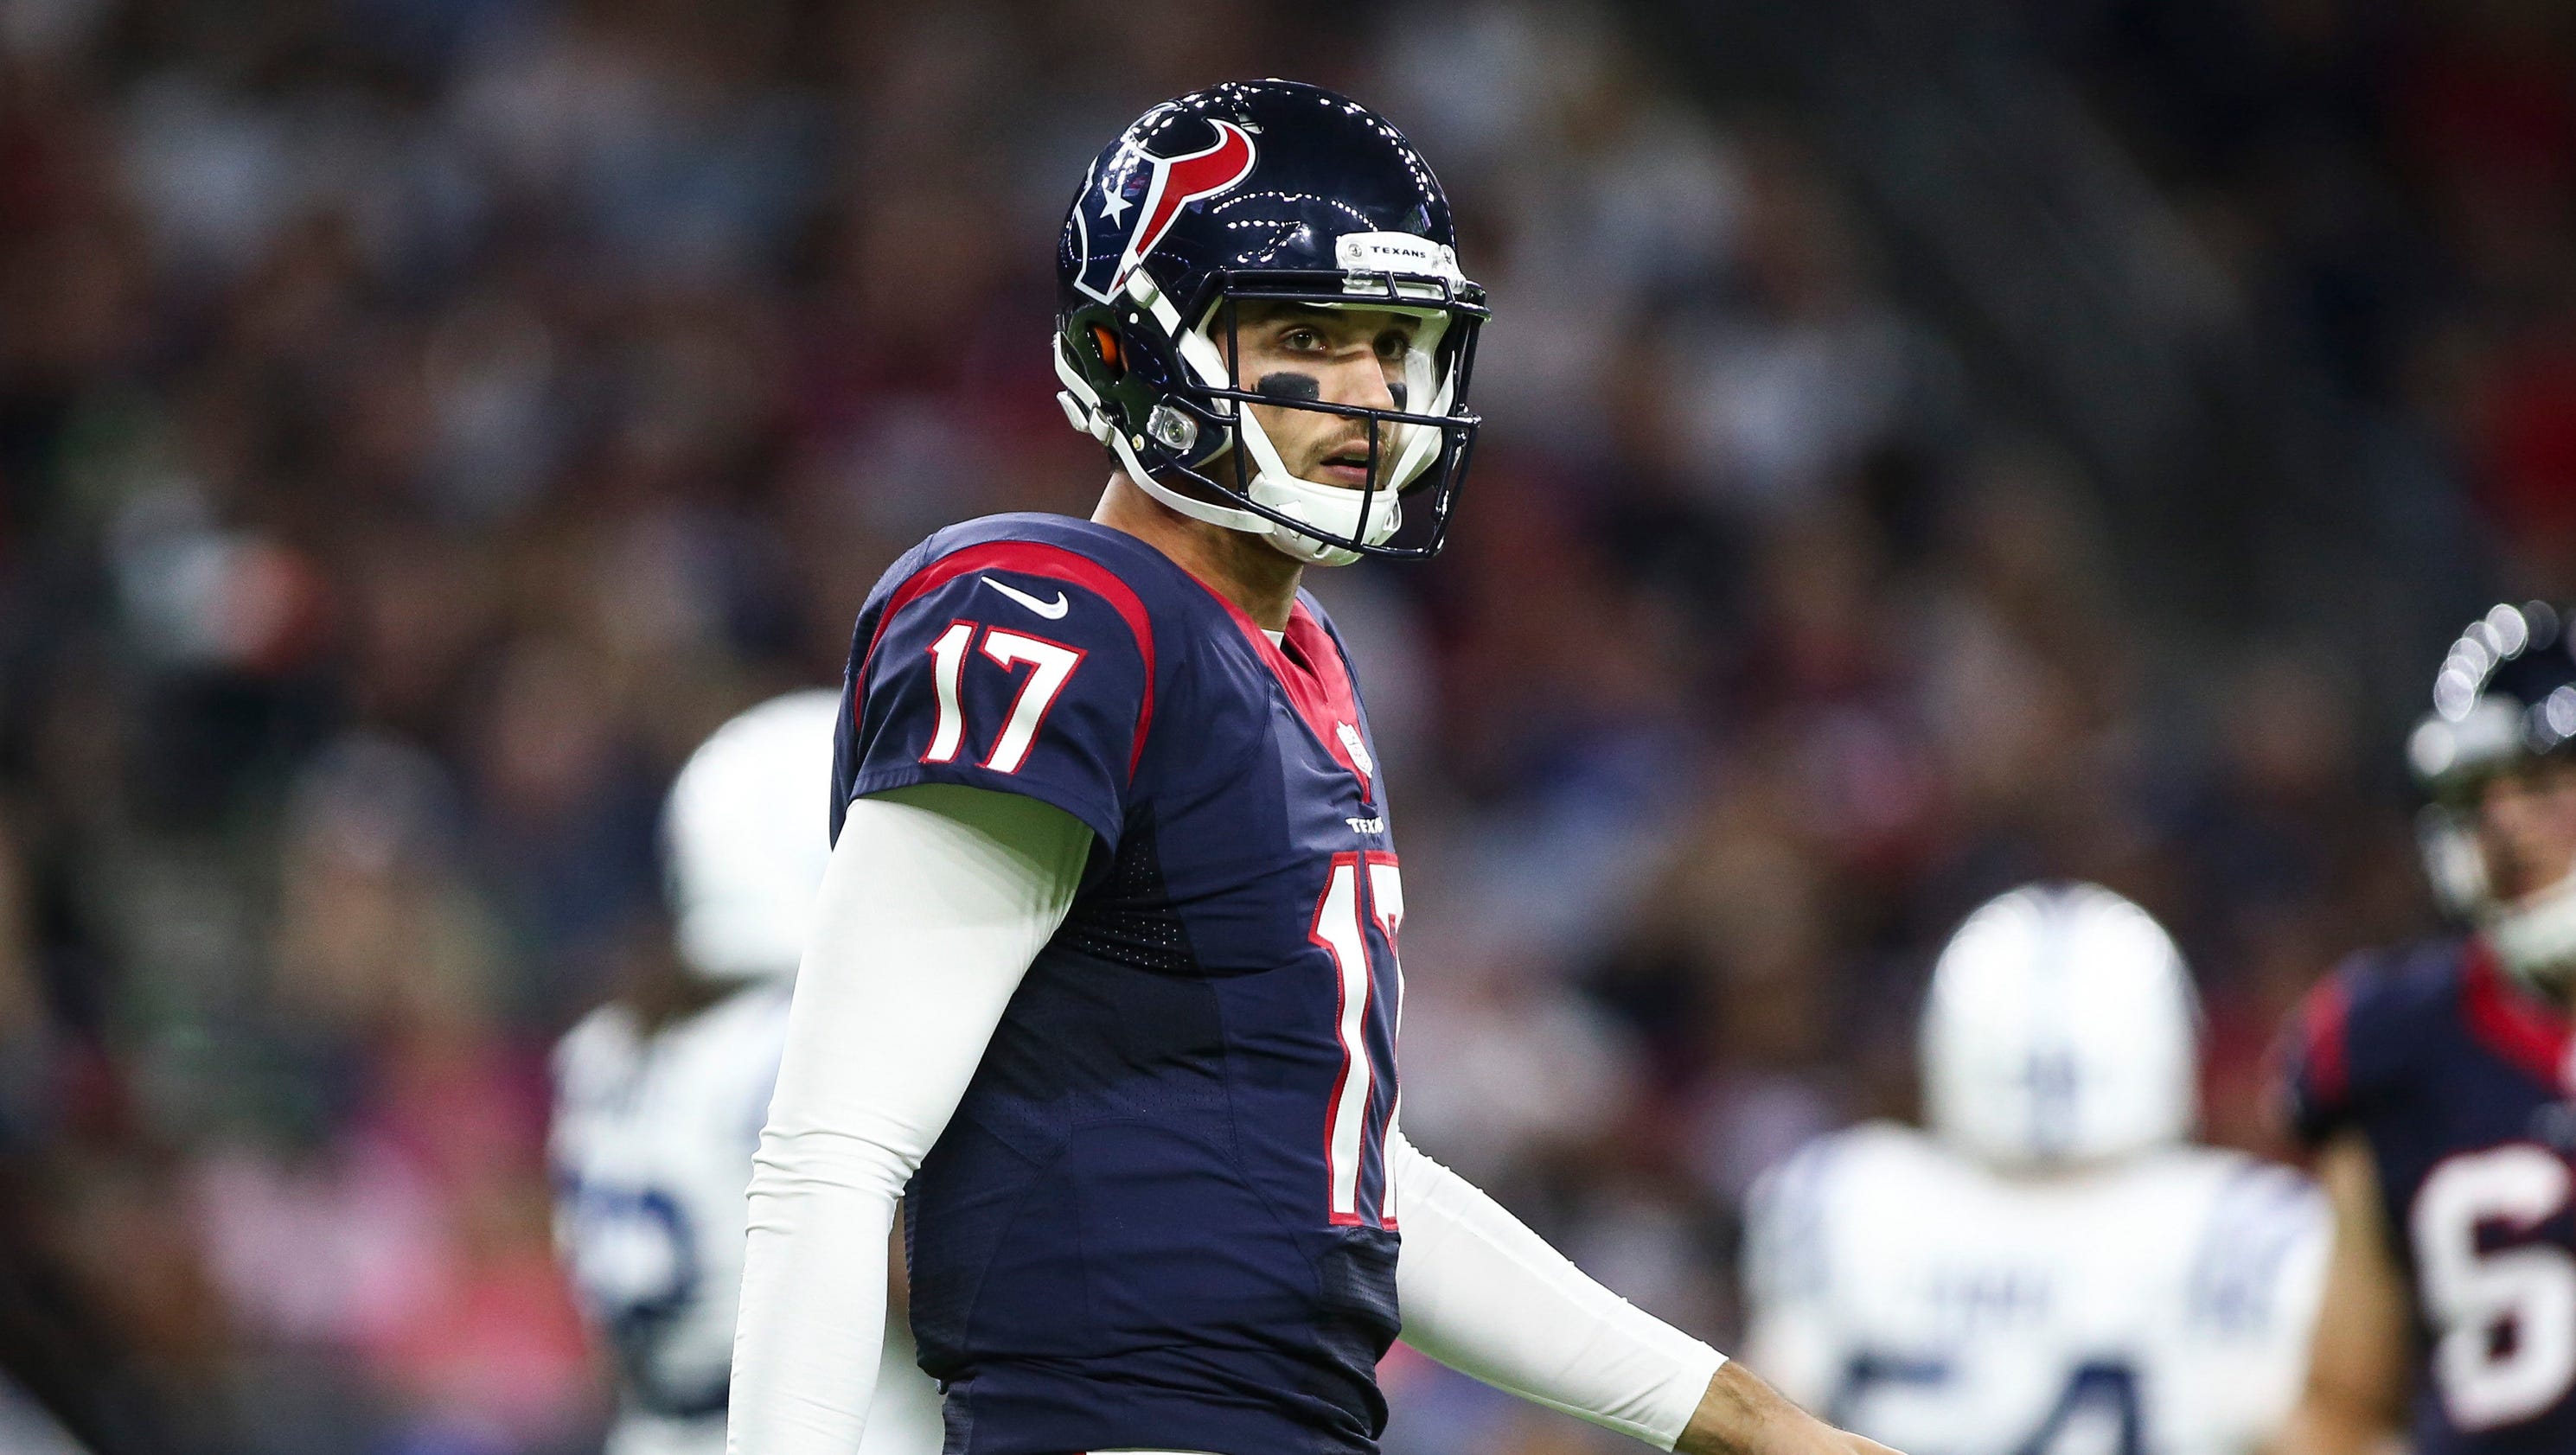 To escape boos, Brock Osweiler must prove he's worth Texans' investment